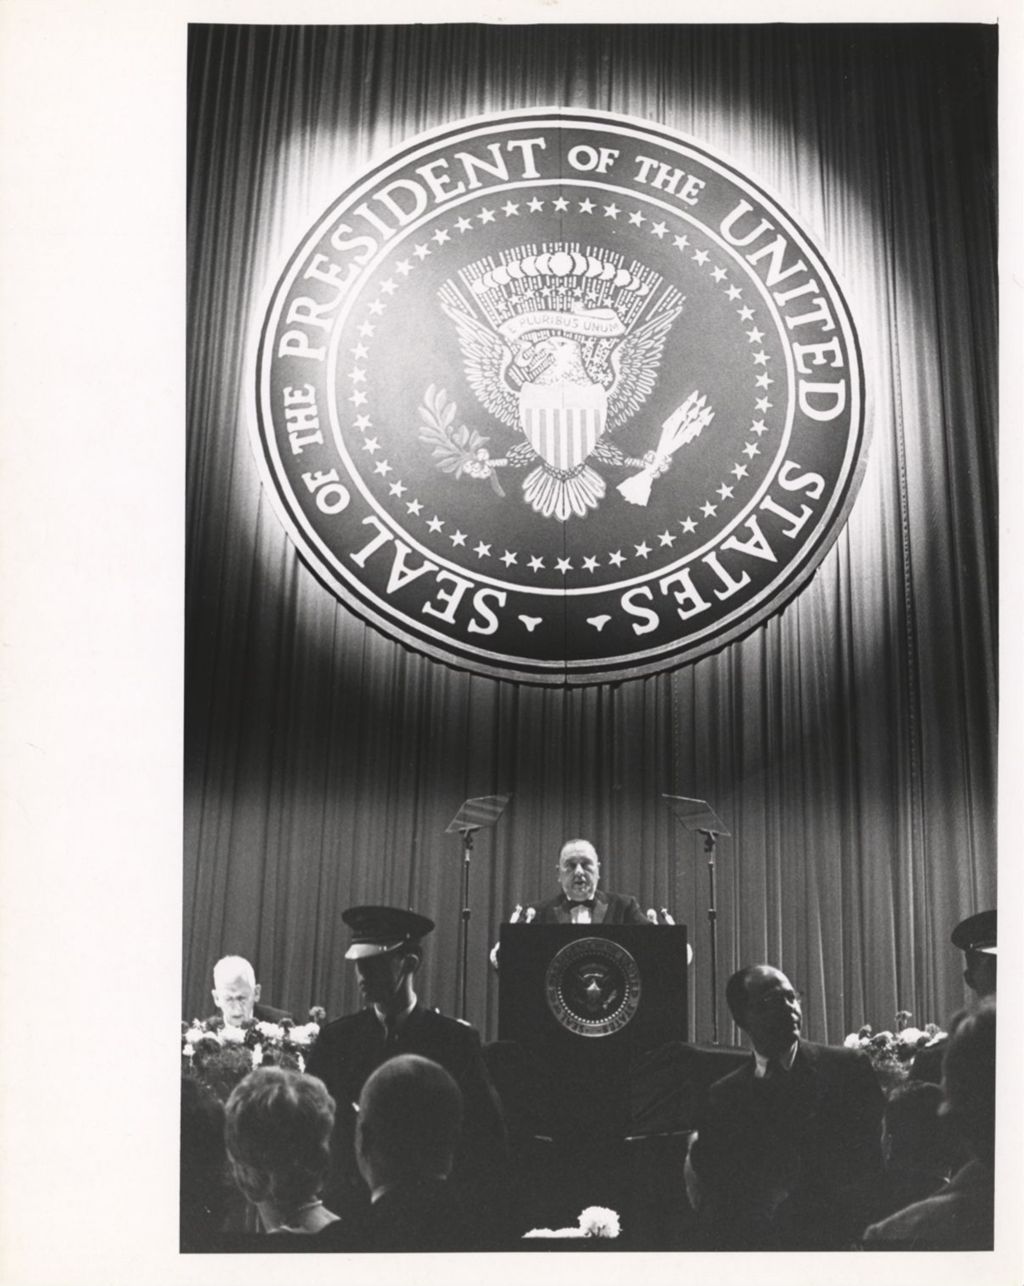 Miniature of Richard J. Daley speaking at Presidential event